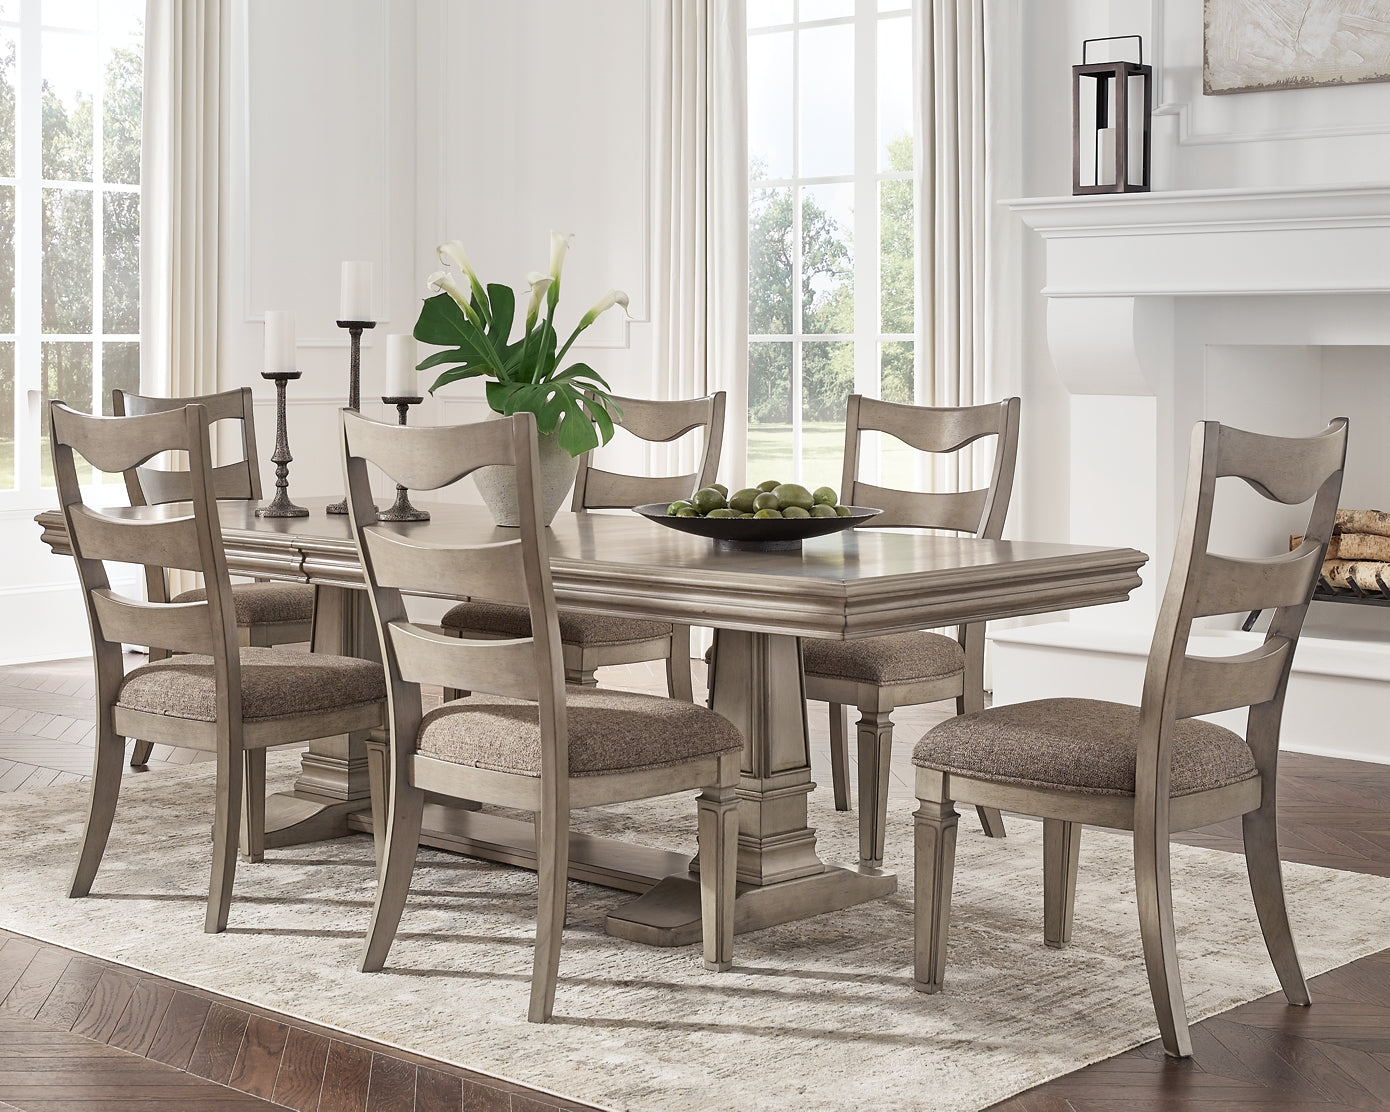 Lexorne Dining Table and 6 Chairs